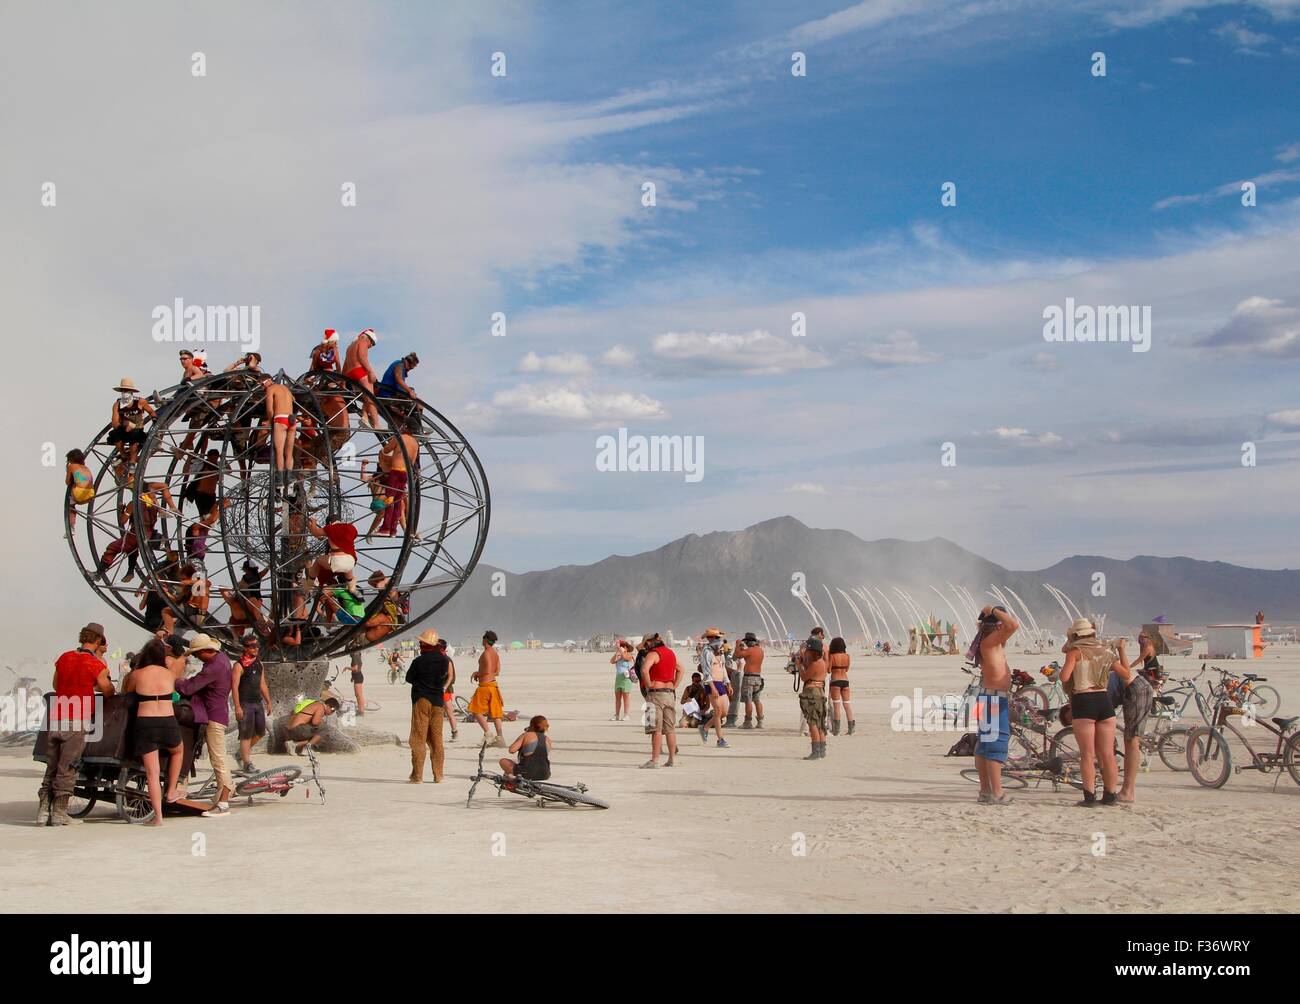 Burners gather in the playa during the annual Burning Man festival in the desert August 30, 2014 in Black Rock City, Nevada. Stock Photo